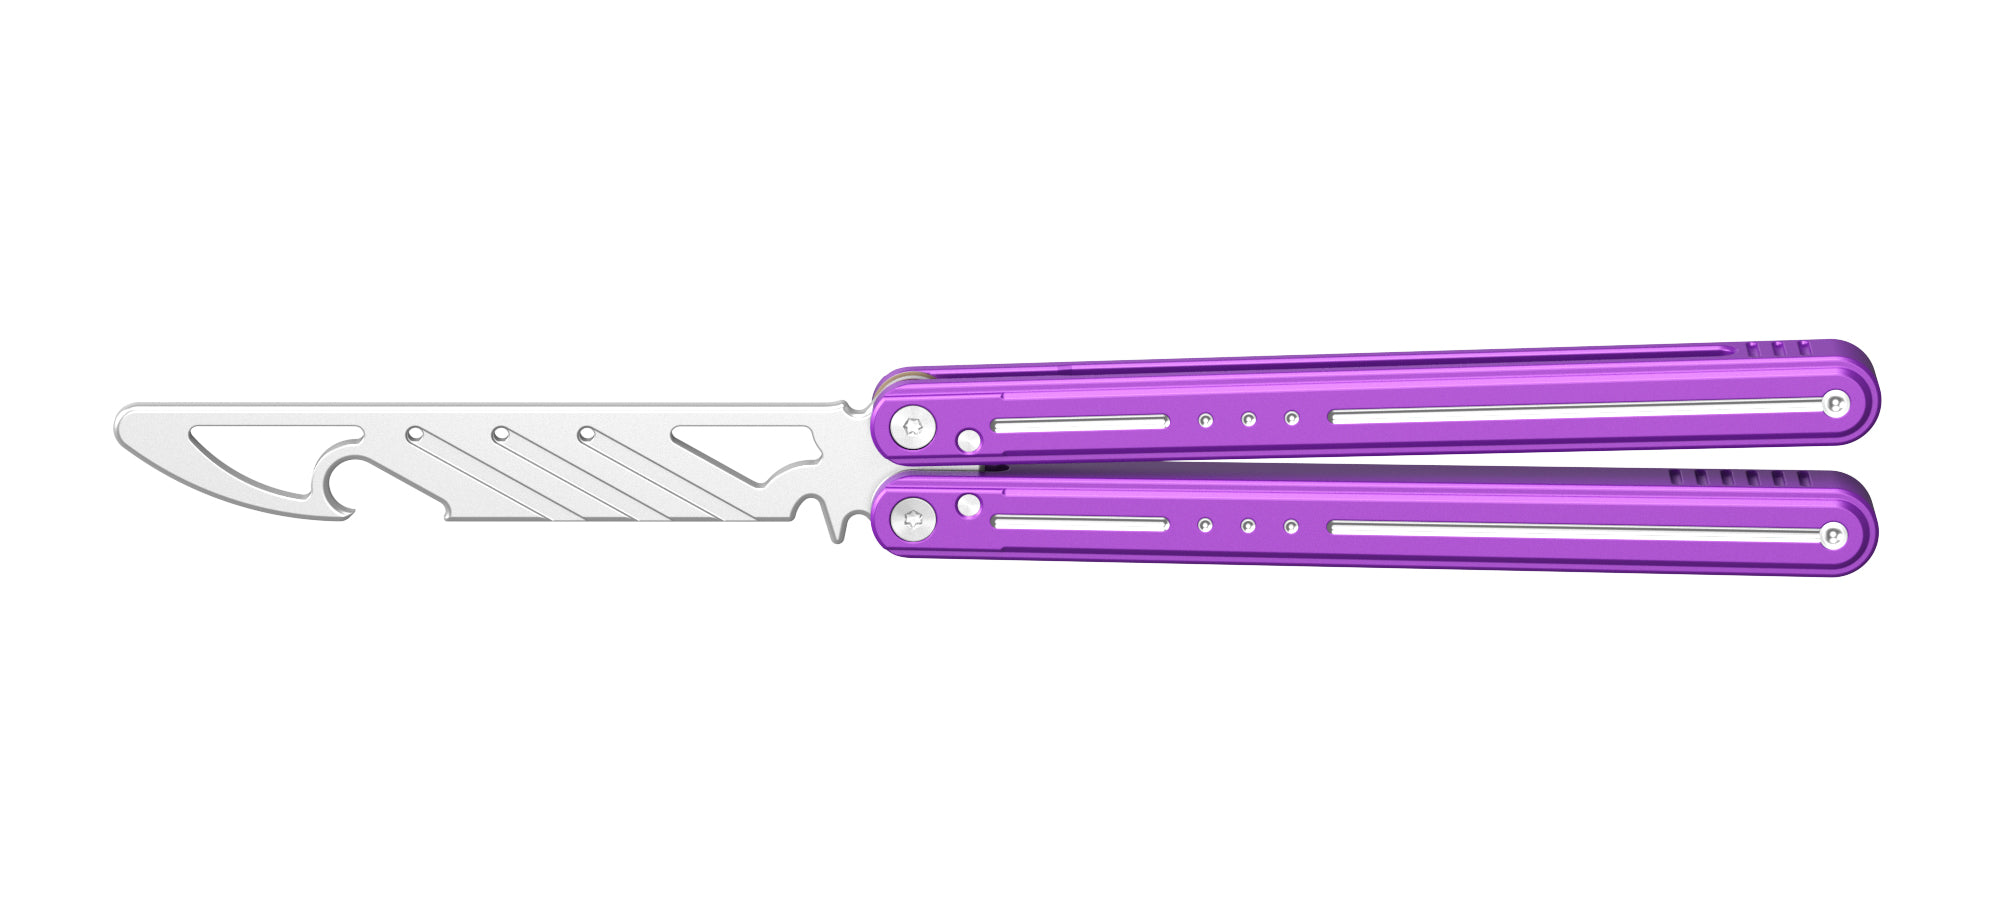 Nabalis_Morse_balisong_butterfly_knife_trainer-Purple-6_Easy_Balisong_Butterfly_Knife_Beginner_Tricks_to_Practice